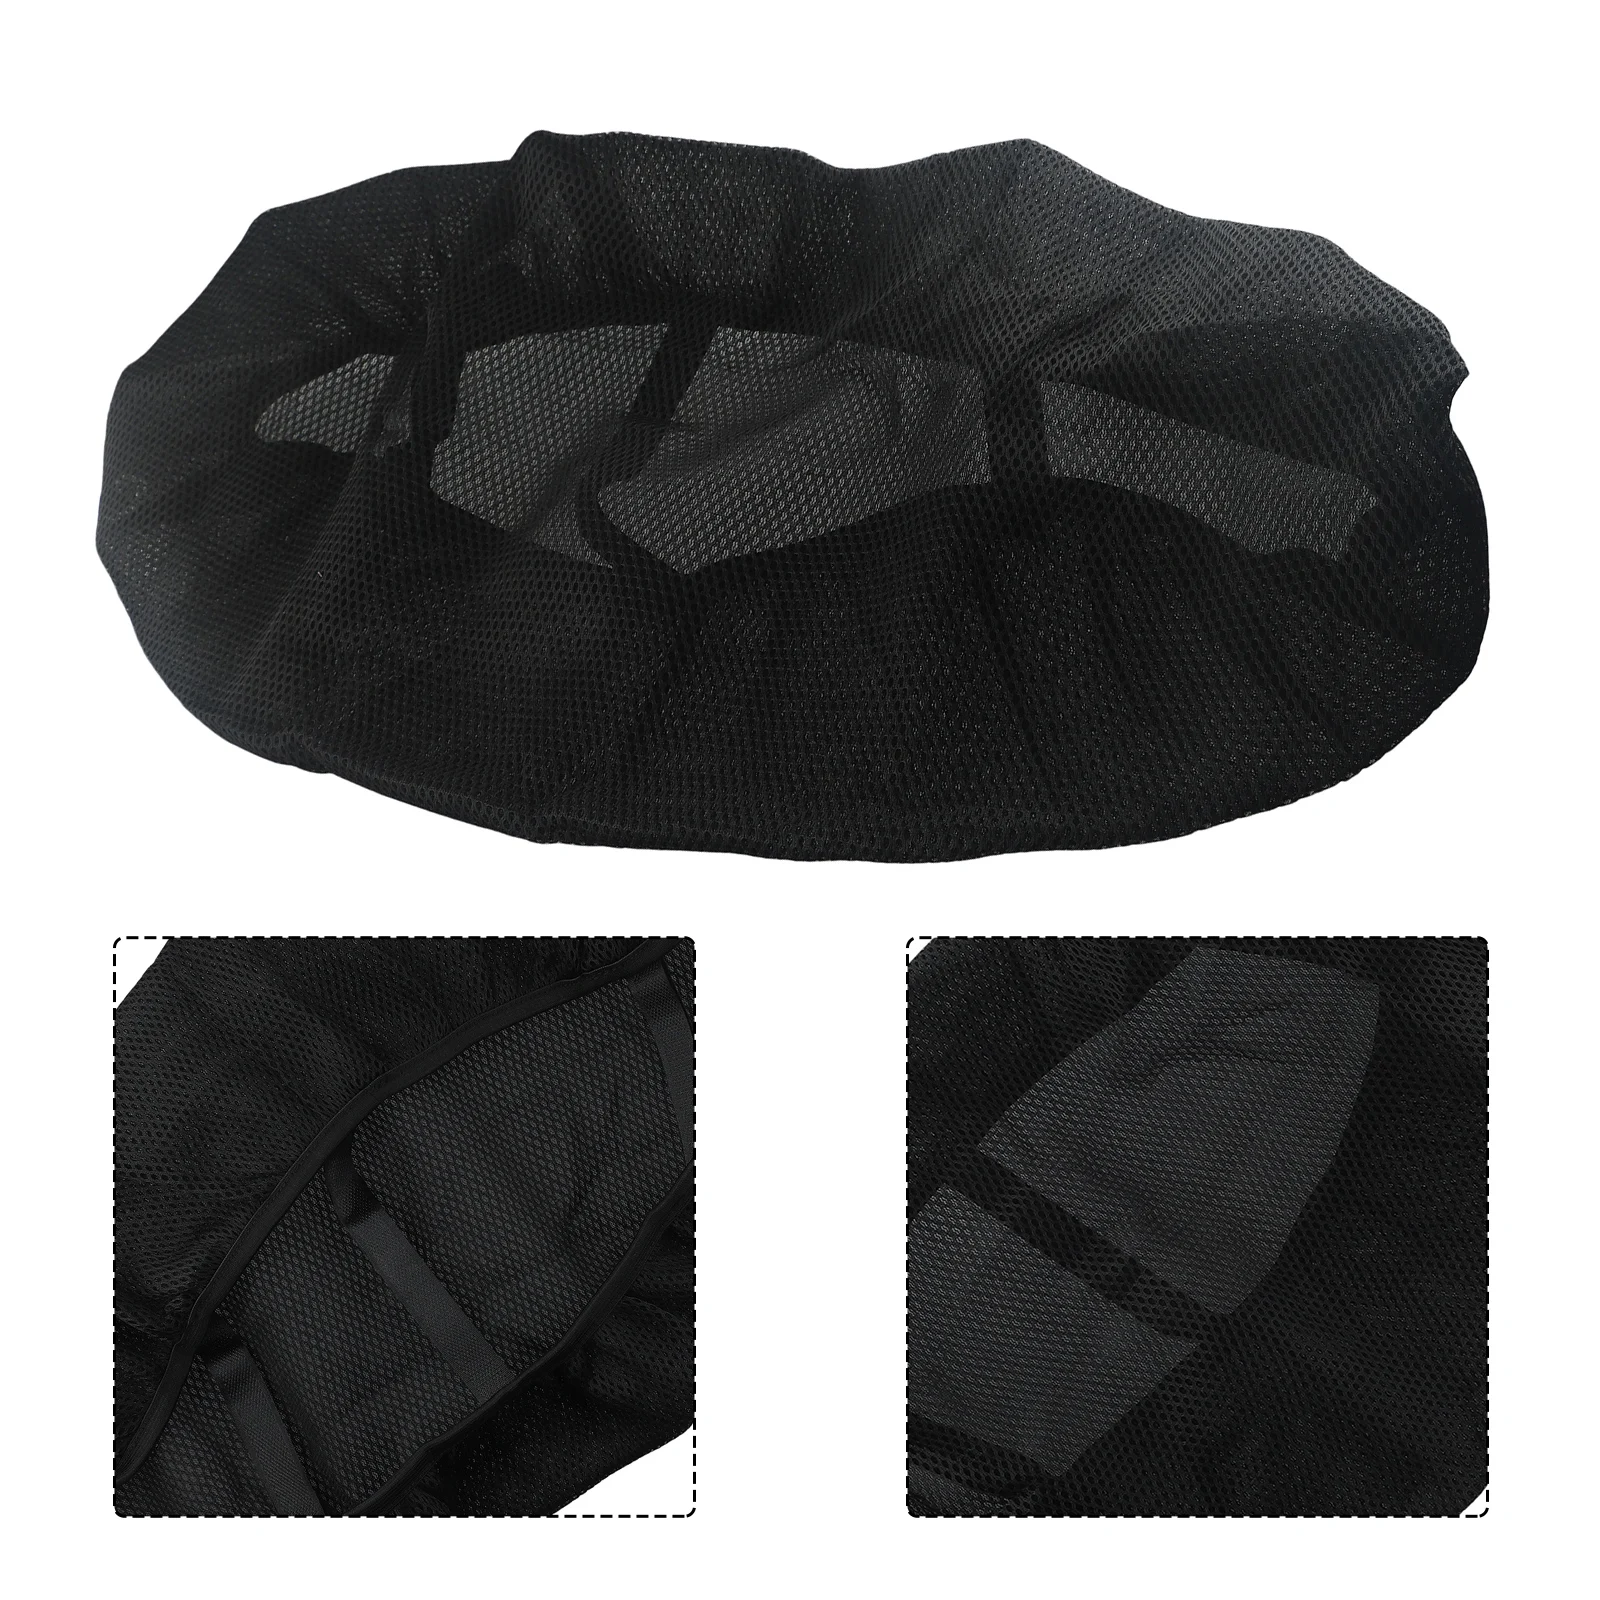 Motorcycle Cushion Seat Cover Motorcycle Mildew-proof Moisture-proof Motorcycle Pad Net 85*60CM Black Breathable motorcycle cushion seat cover motorcycle mildew proof moisture proof motorcycle pad net 1pcs anti slip breathable